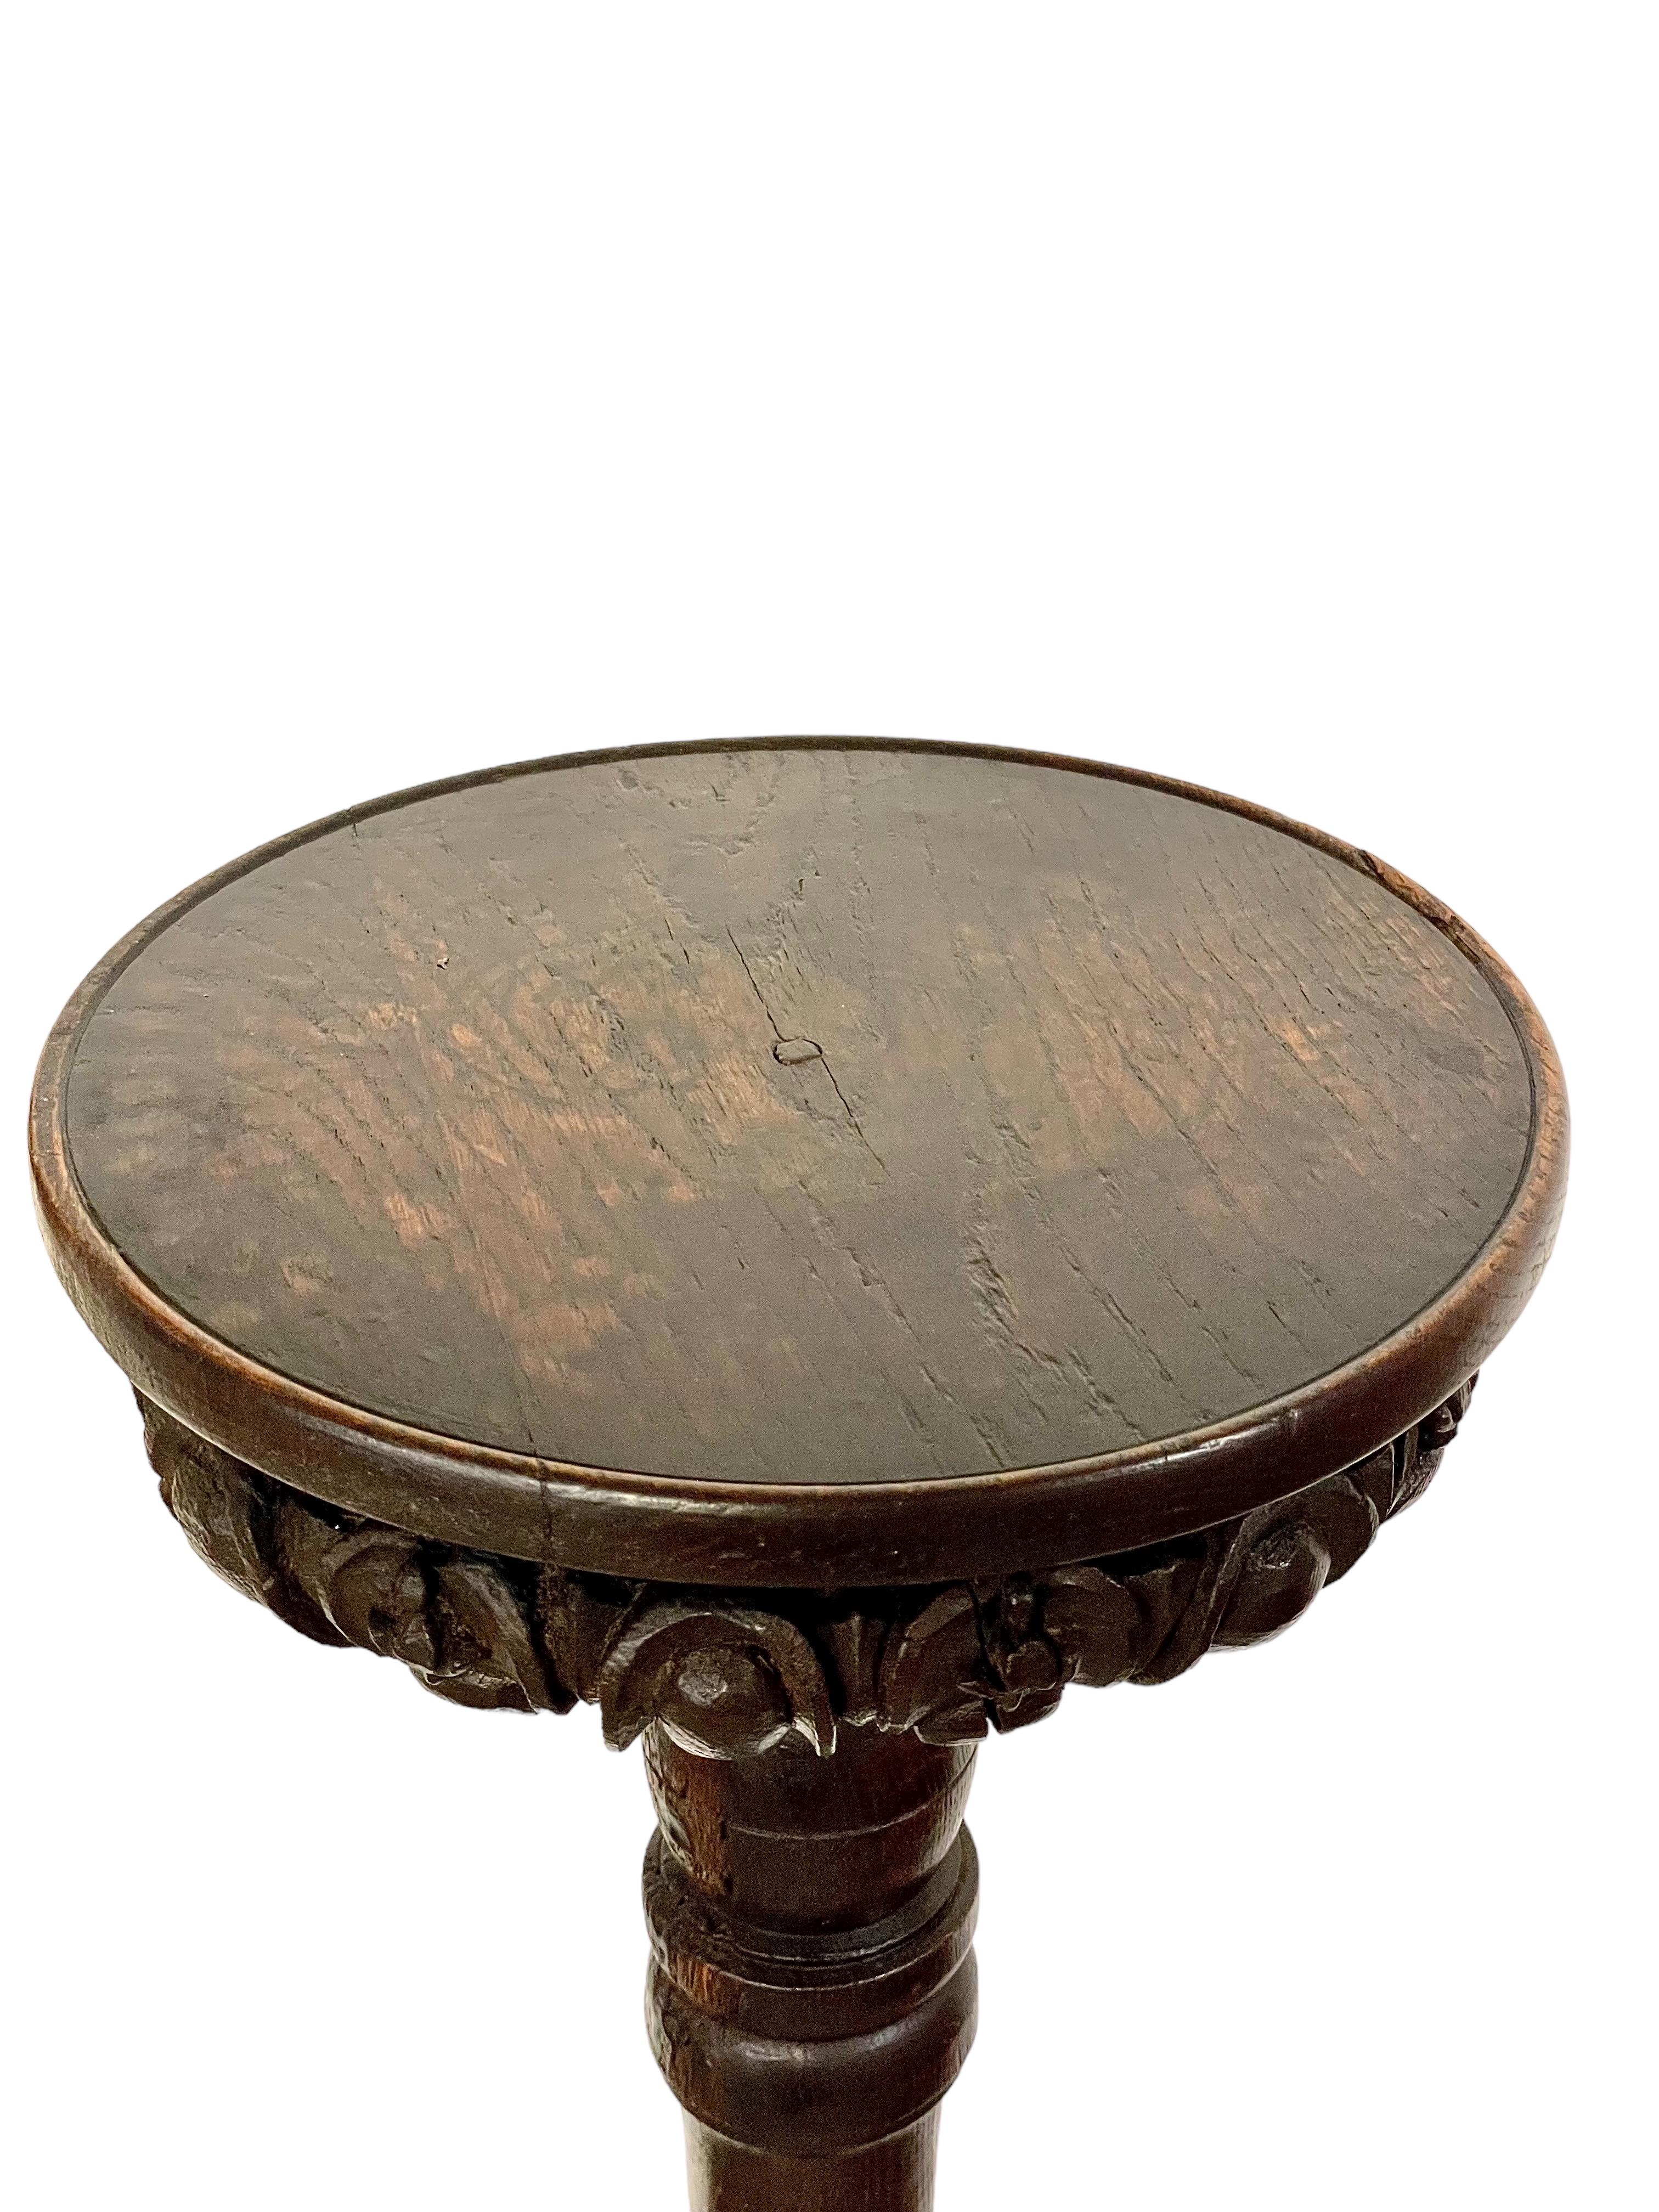 A fine quality 17th century torchère, or pedestal, with an elegantly turned column and deeply tiered circular base. The top surface is a flat polished disc with a finely carved and gadrooned underside. In excellent original condition with a rich